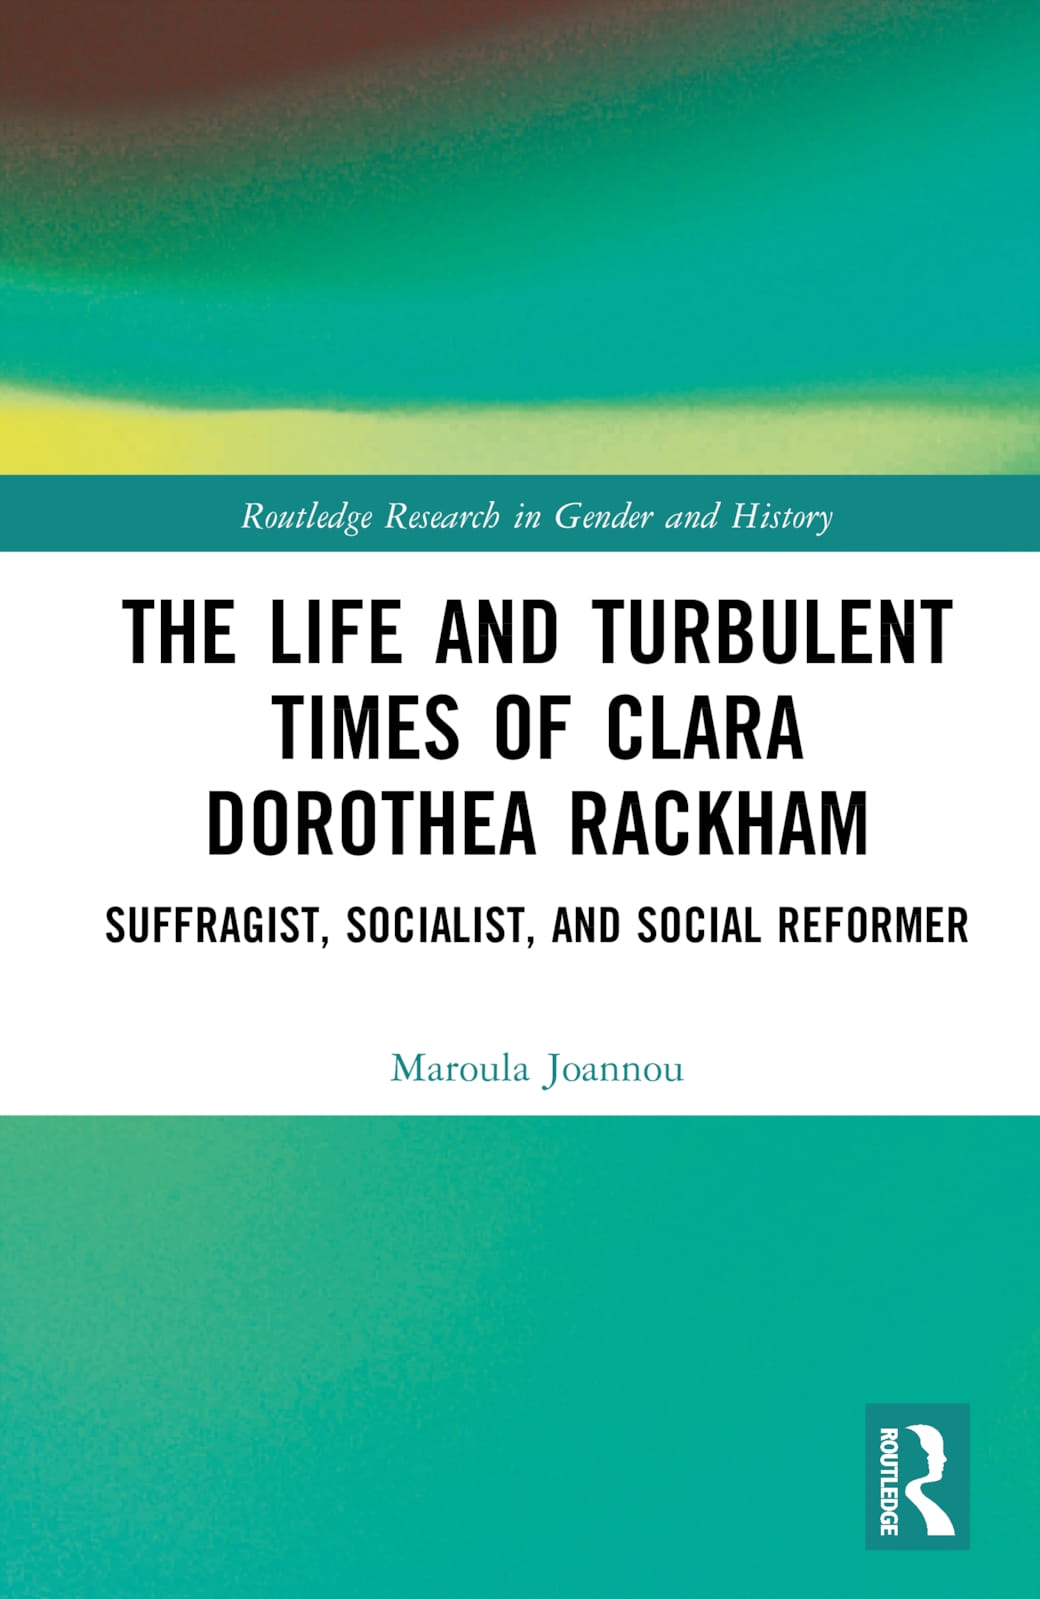 The Life and Turbulent Times of Clara Dorothea Rackham: Suffragist, Socialist, and Social Reformer